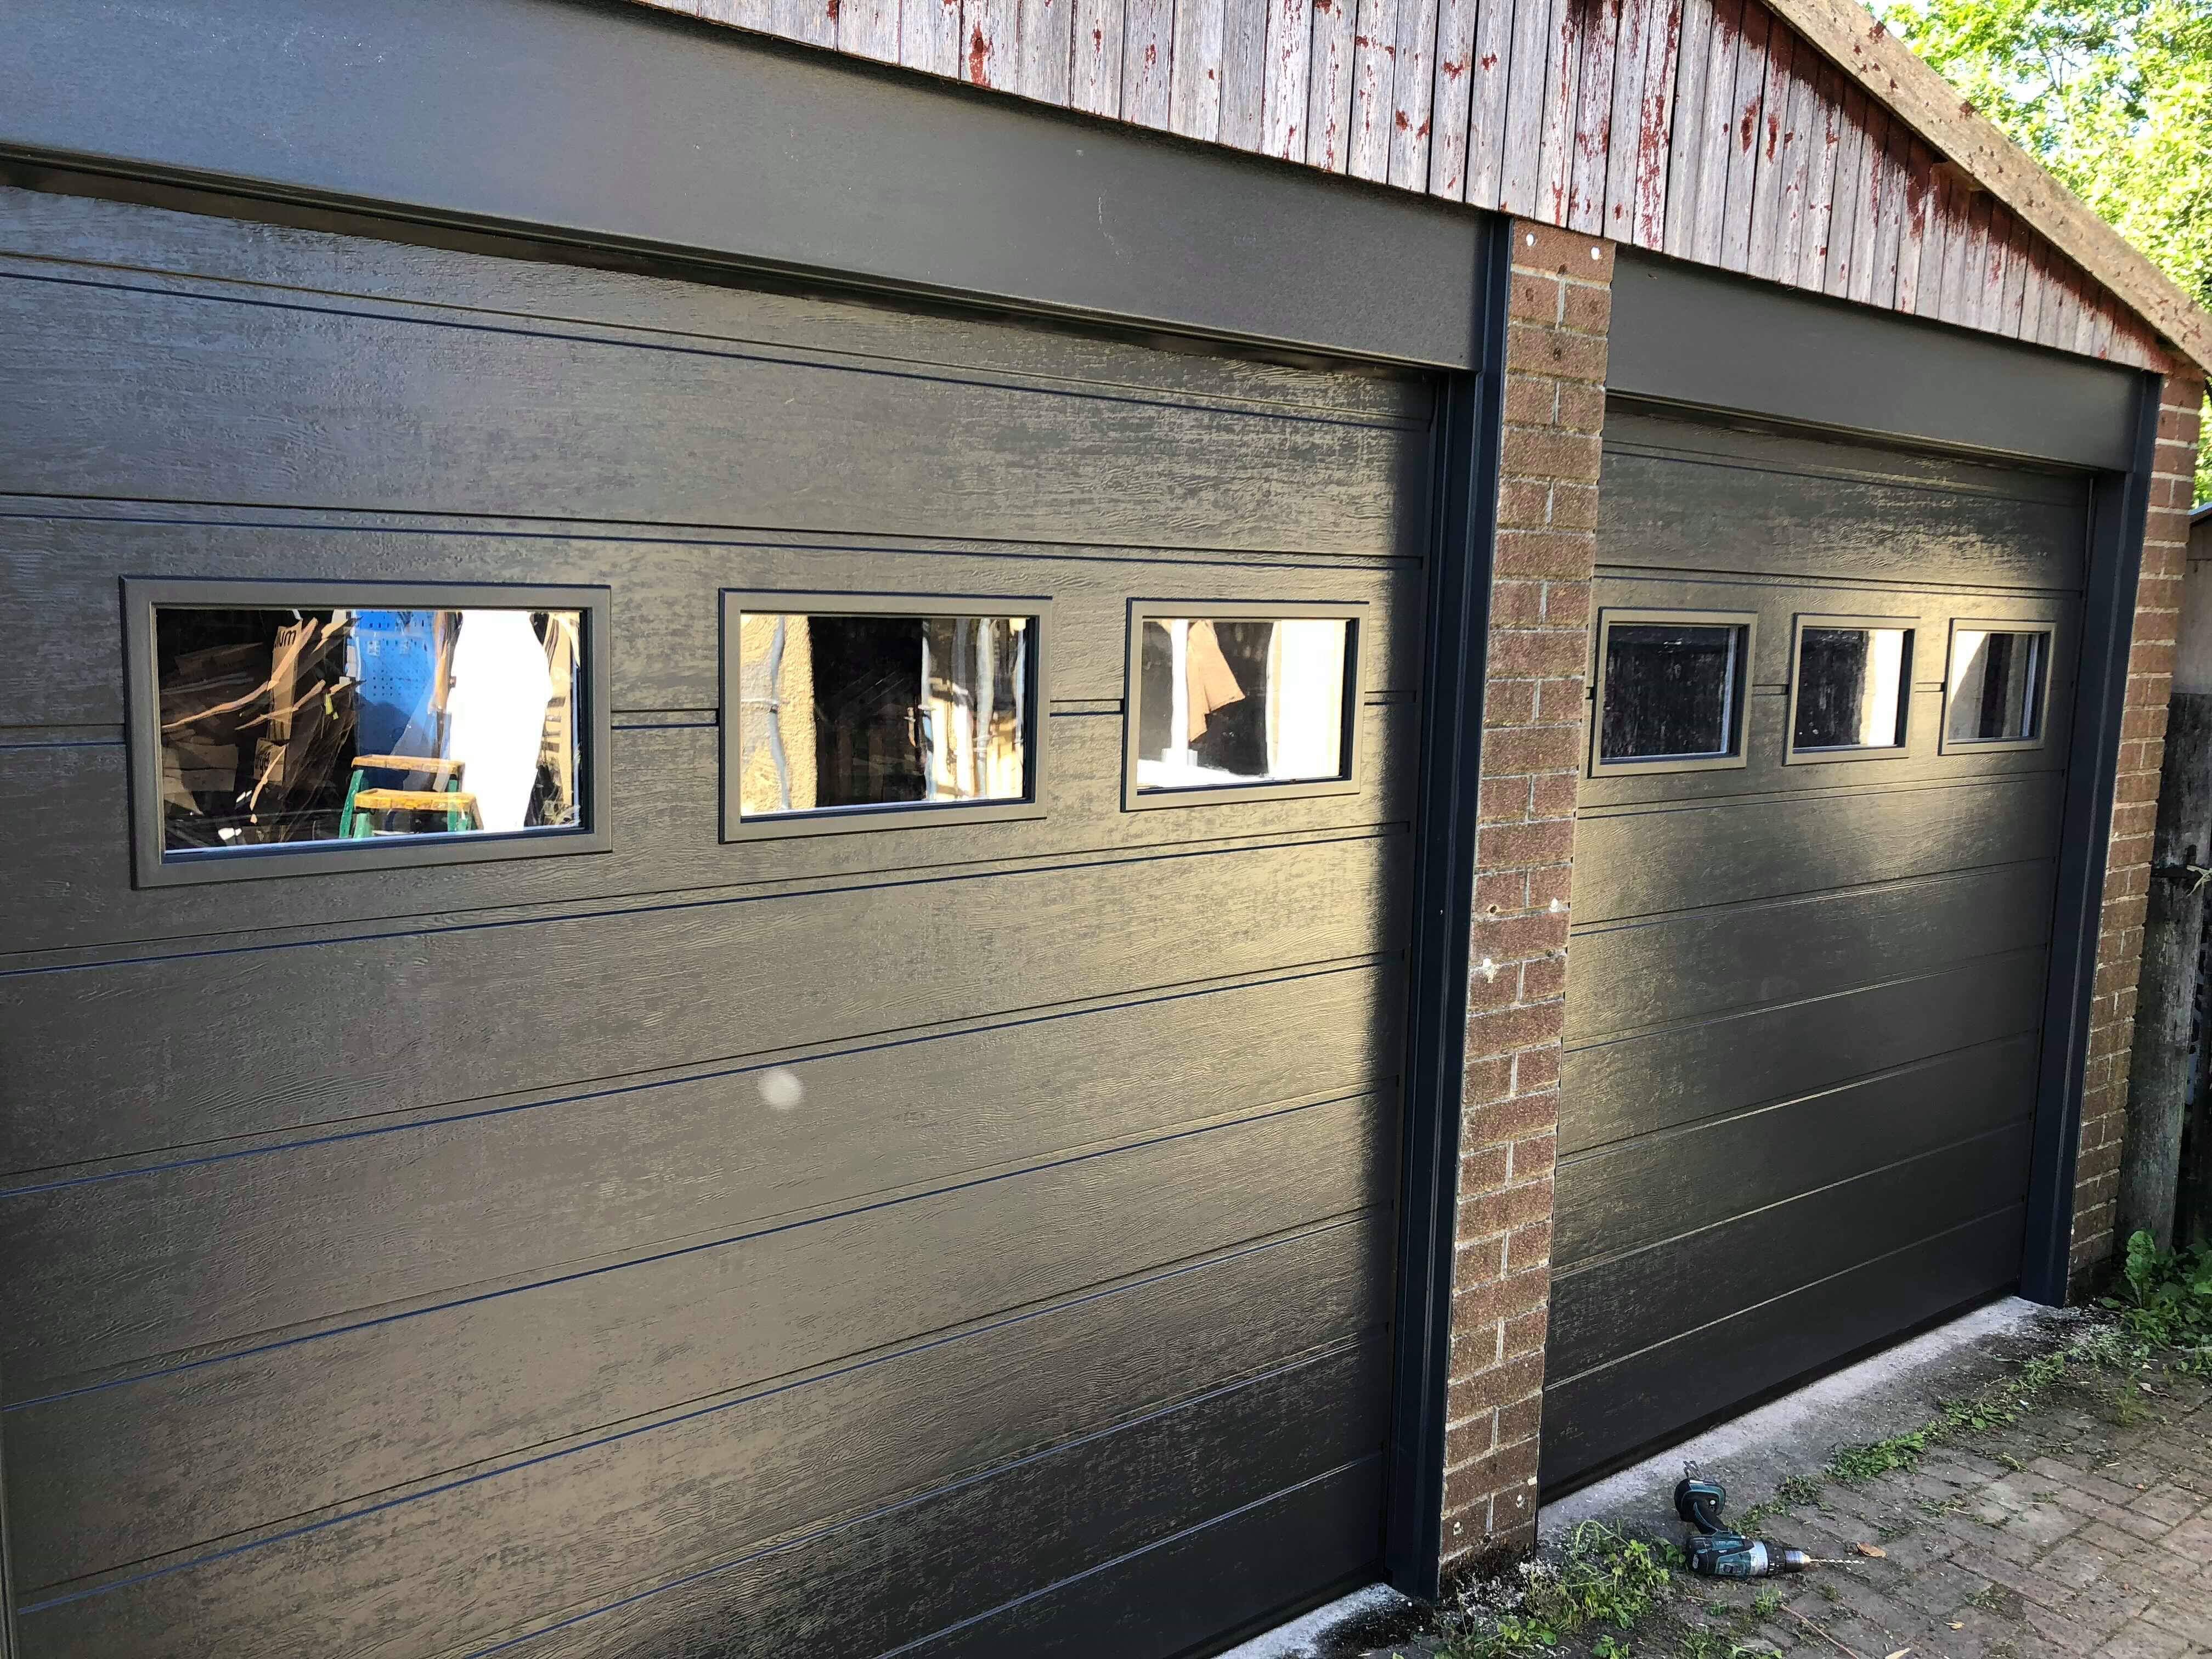 Two sectional garage doors in RAL colour with windows